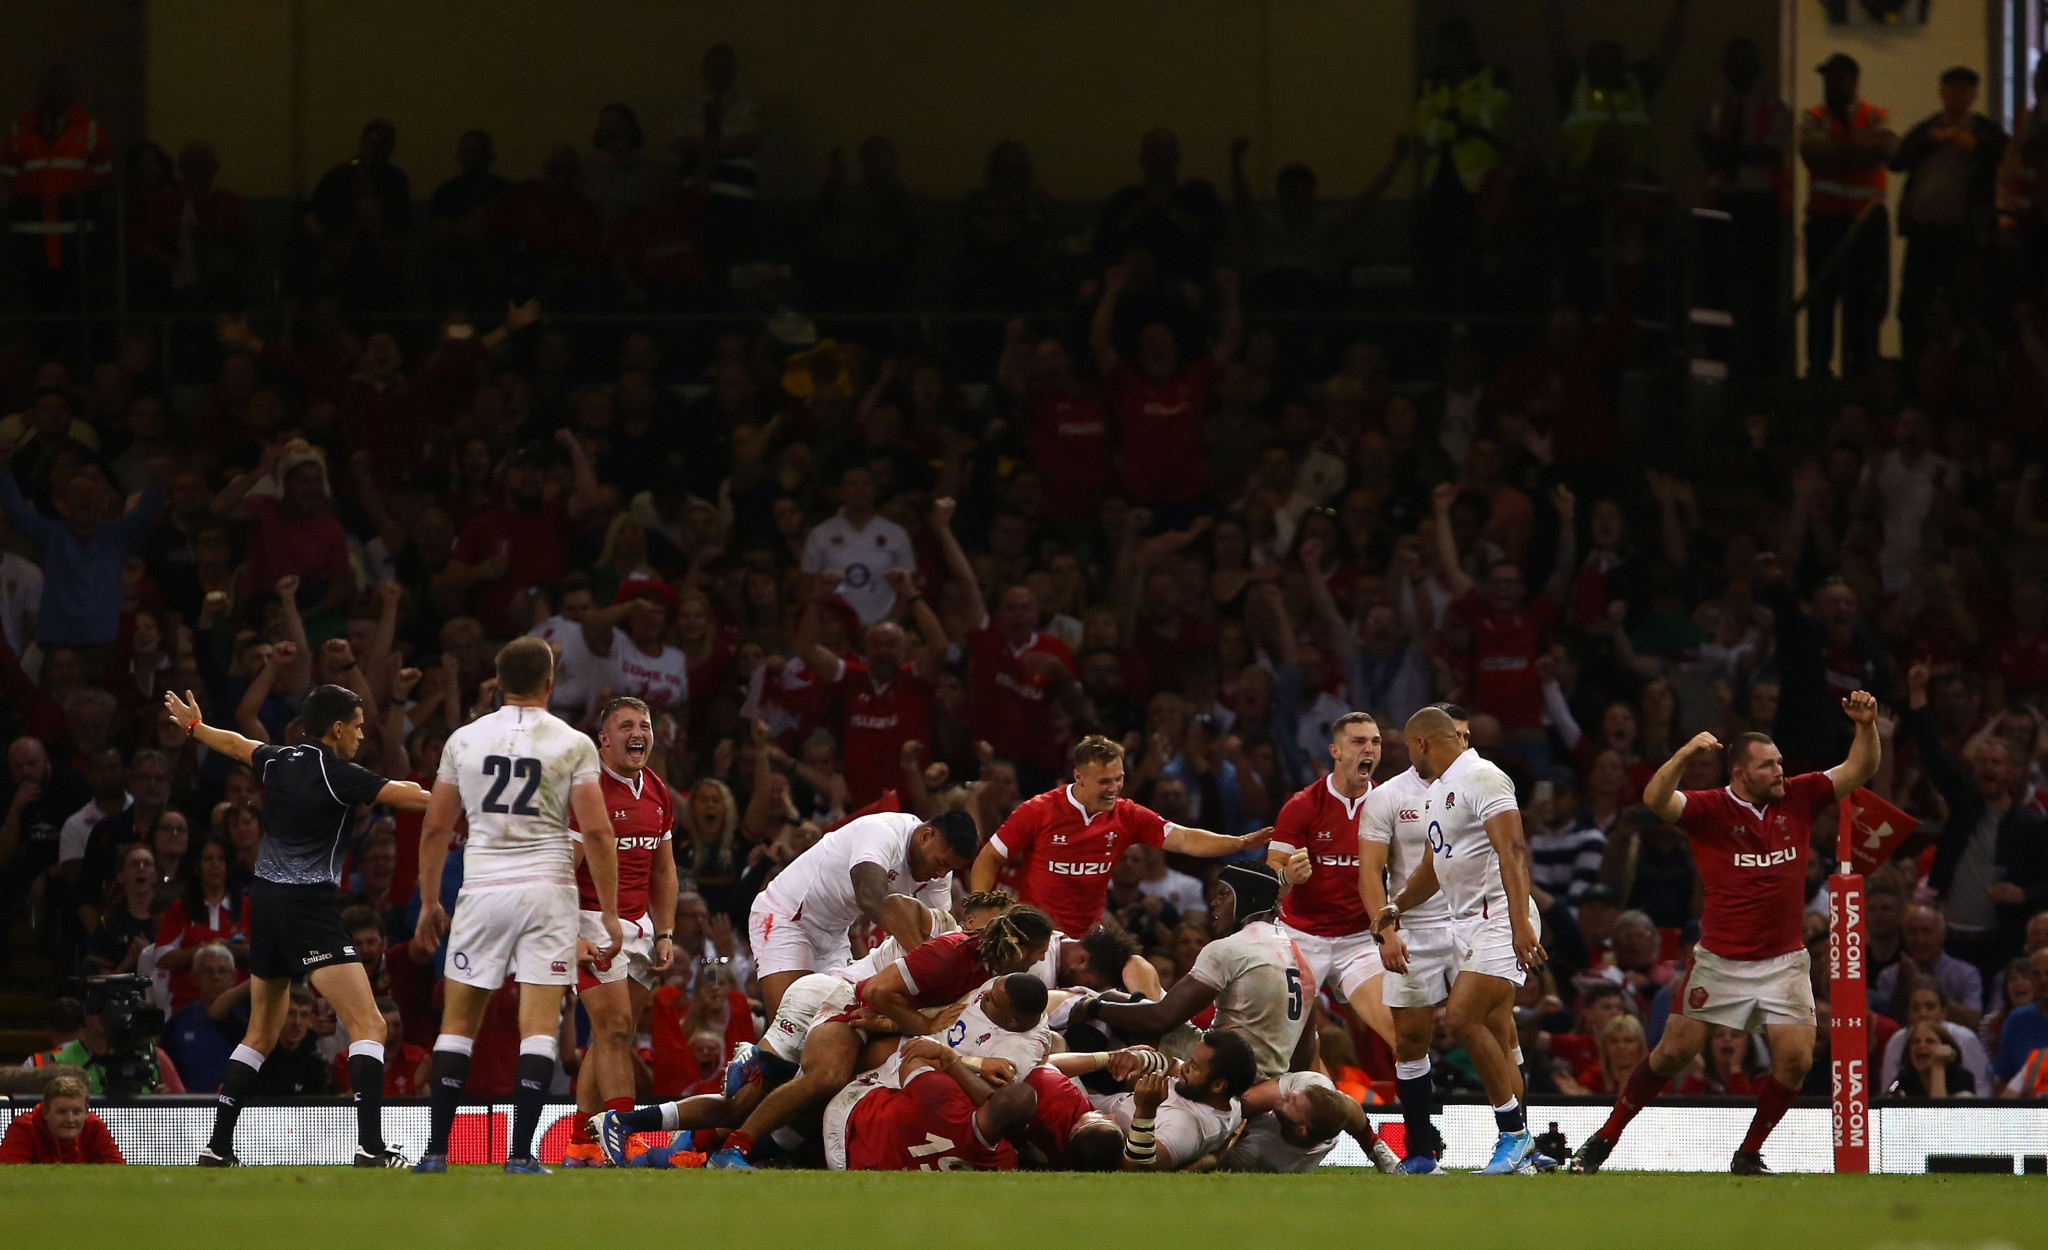 The match between Wales and England in Cardiff is a highlight of the rugby calendar ©Getty Images